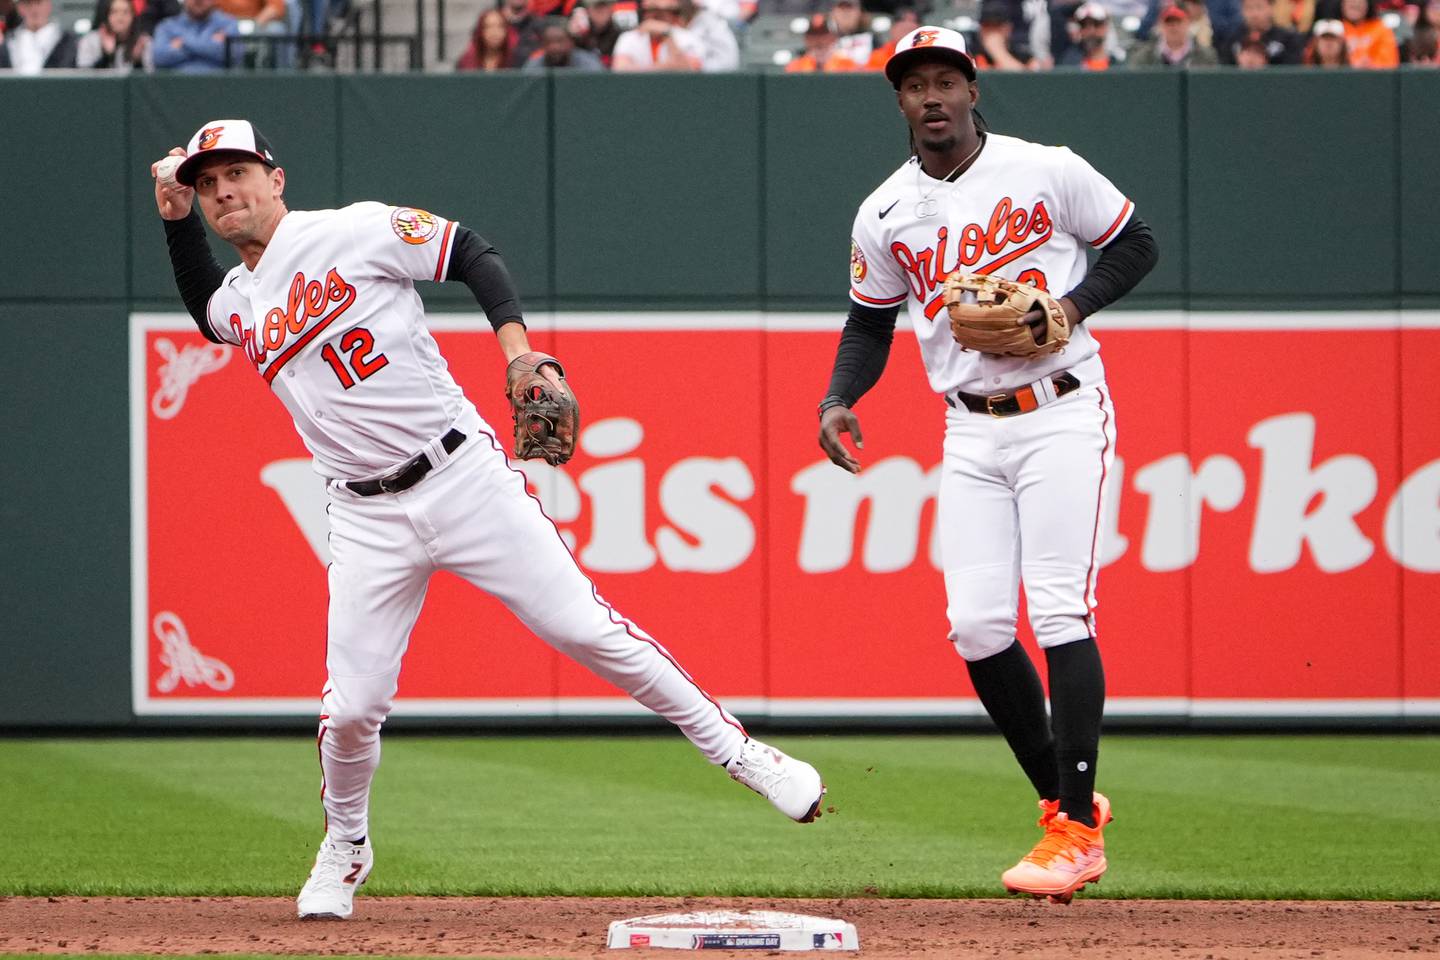 Baltimore Orioles second baseman Adam Frazier (12), next to shortstop Jorge Mateo (3), fields the ball in the second inning of a baseball game against the New York Yankees on Friday, April 7. The Orioles hosted the Yankees for their Home Opener at Camden Yards.